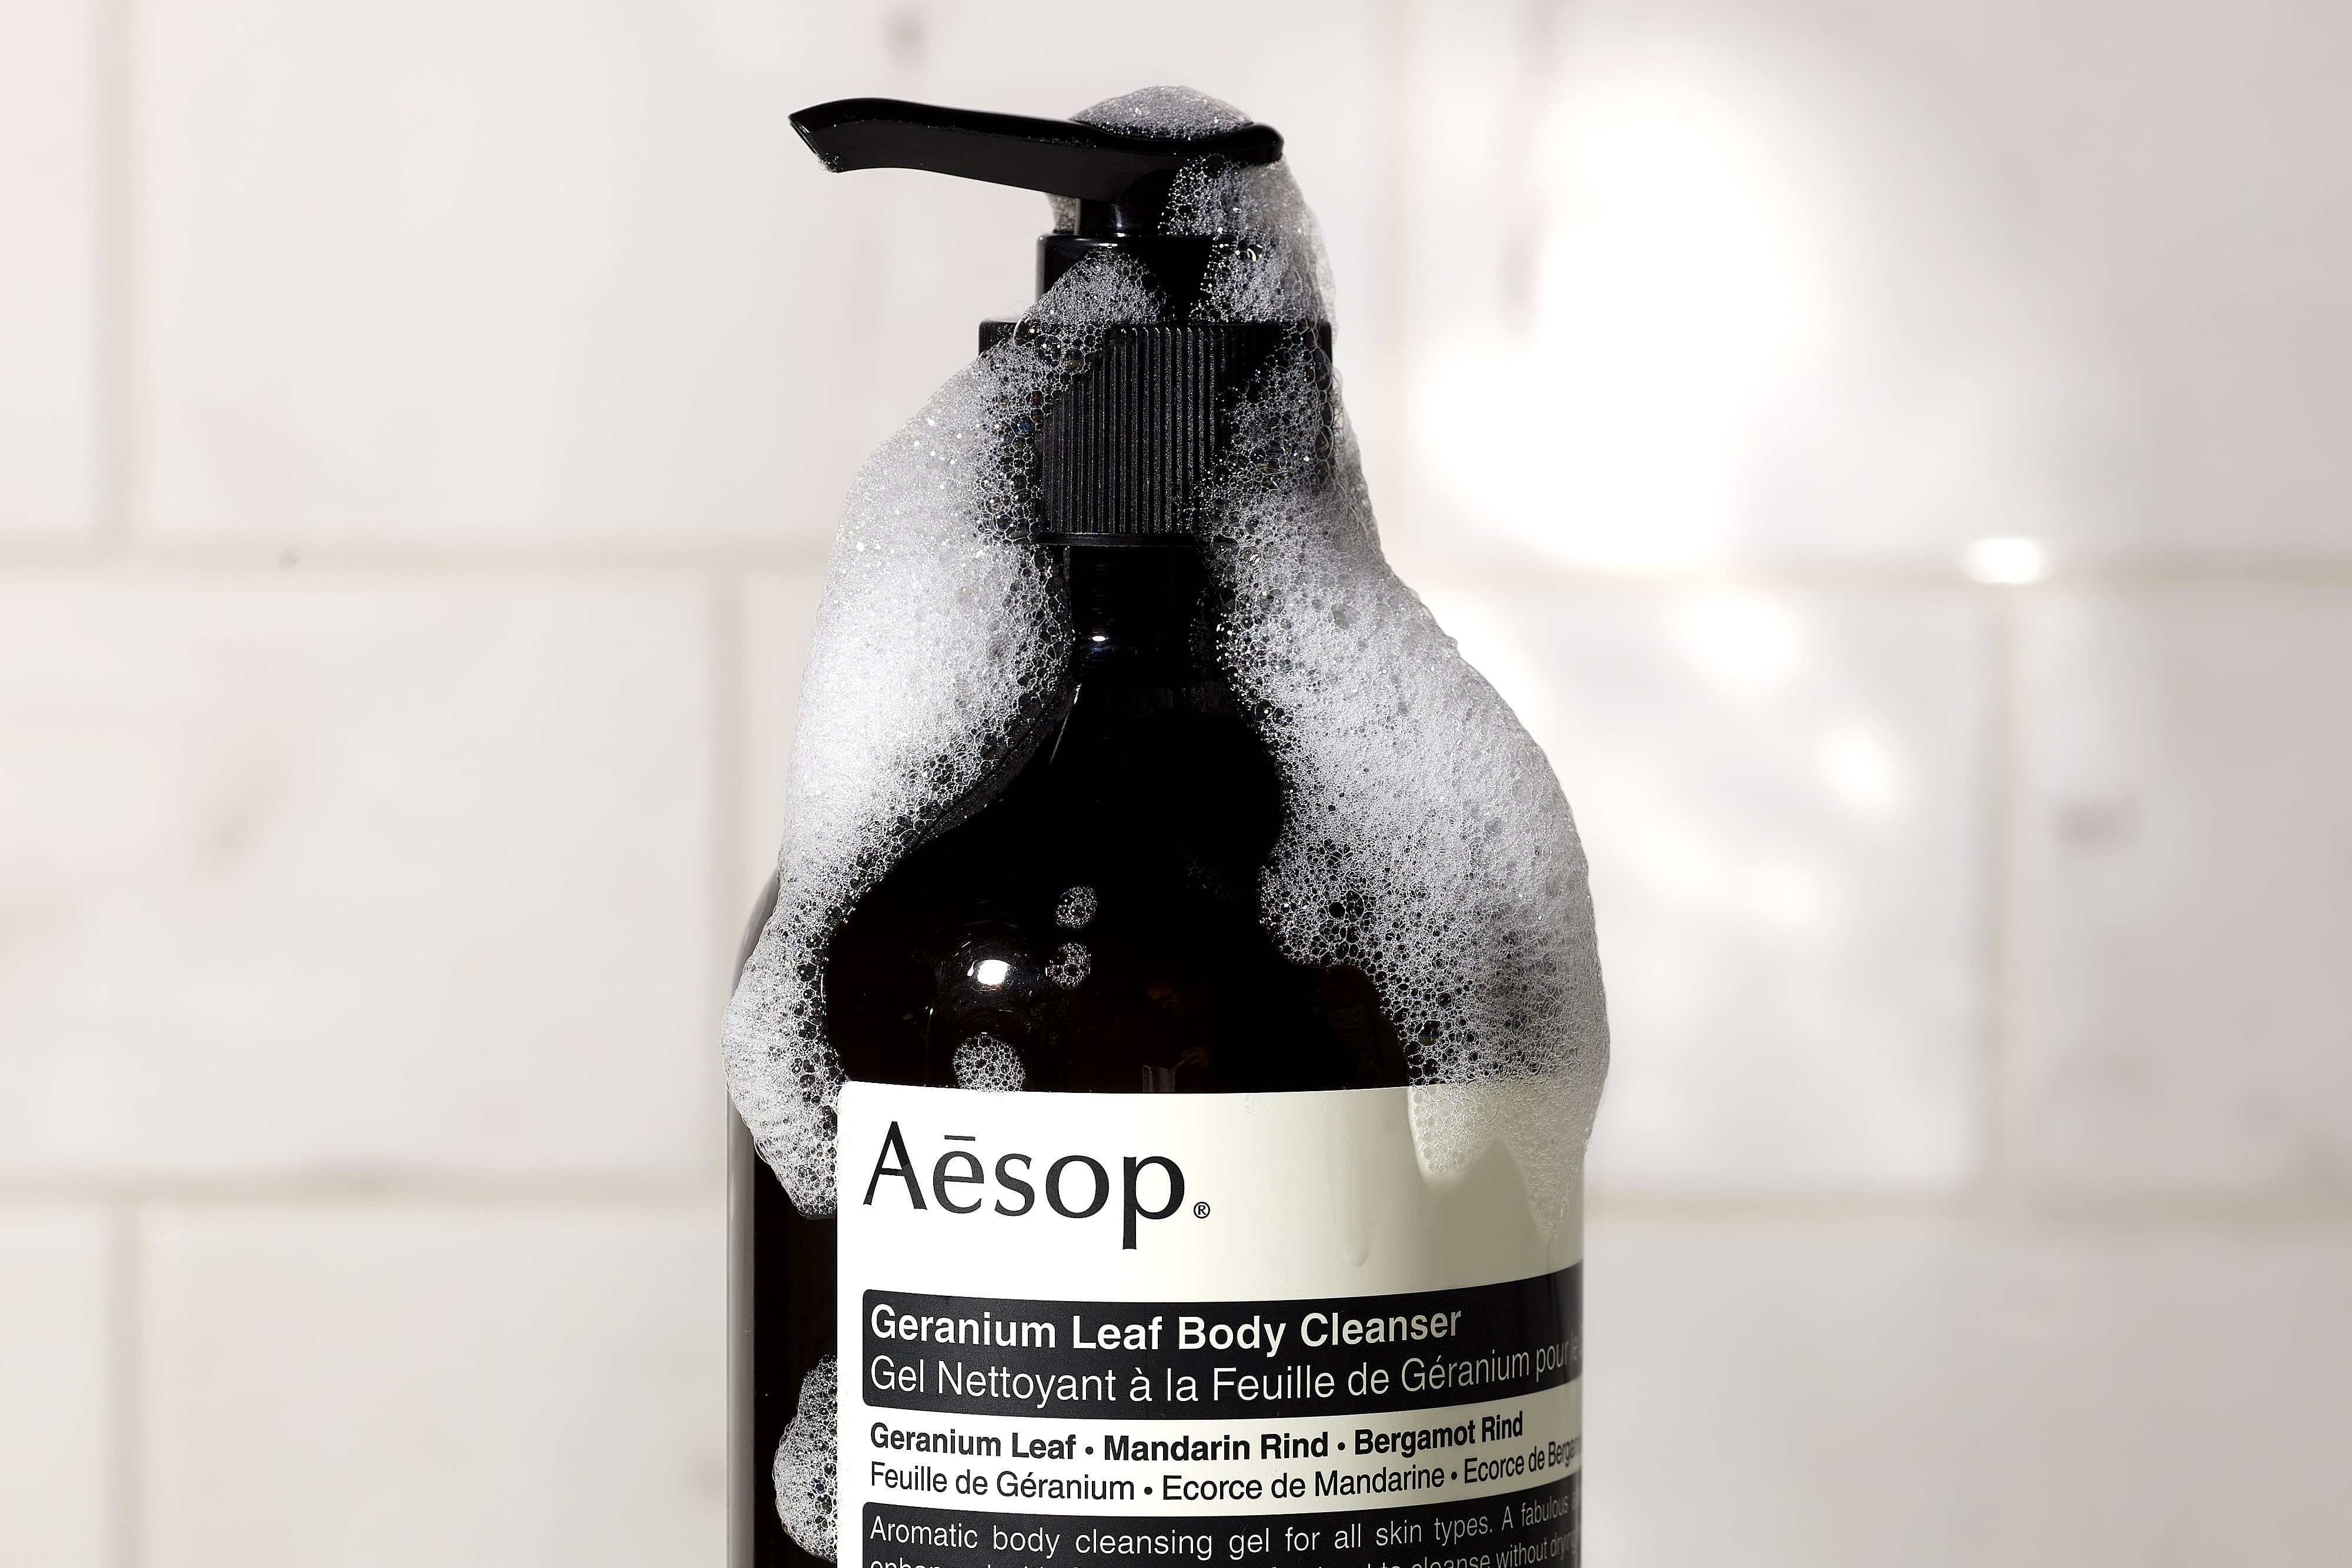 7 Best Aesop Products for Skin and Body in 2023